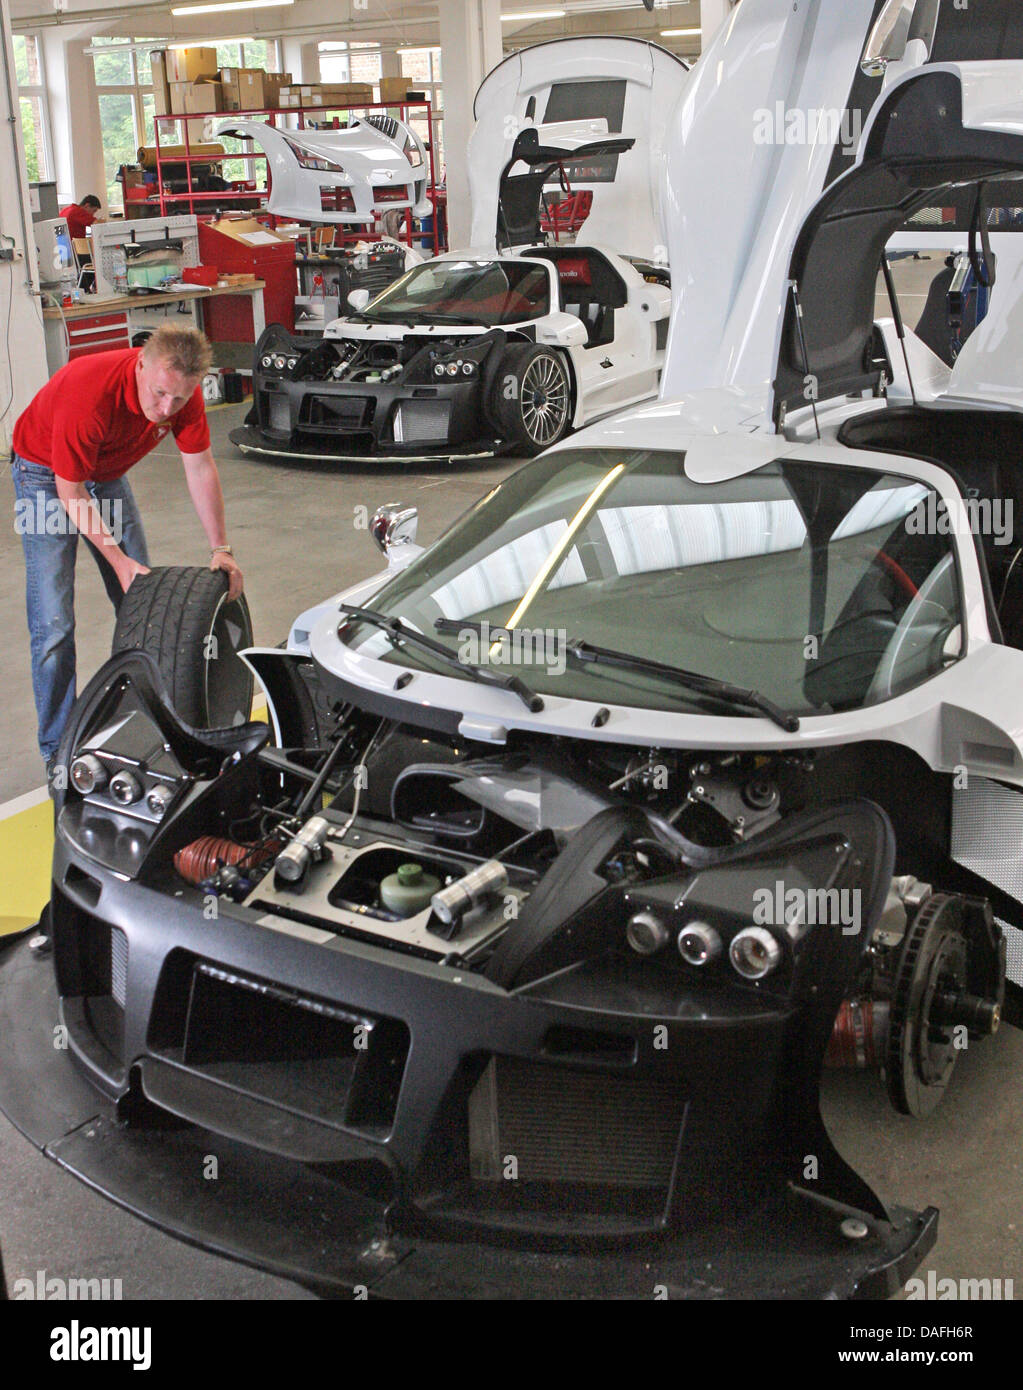 A file picture dated 4 June 2008 shows car mechanic Joerg Ottmann during work on the 650 horsepower fast car Apollo at the Gumpert sports car plant in Altenburg, Germany. The company will present their new car, the 700 horsepower Tornate, at the car showroom in Geneva, Switzerland. The name is a work-in-progress titel and is derived from the Italian word for switchback. The two-sea Stock Photo